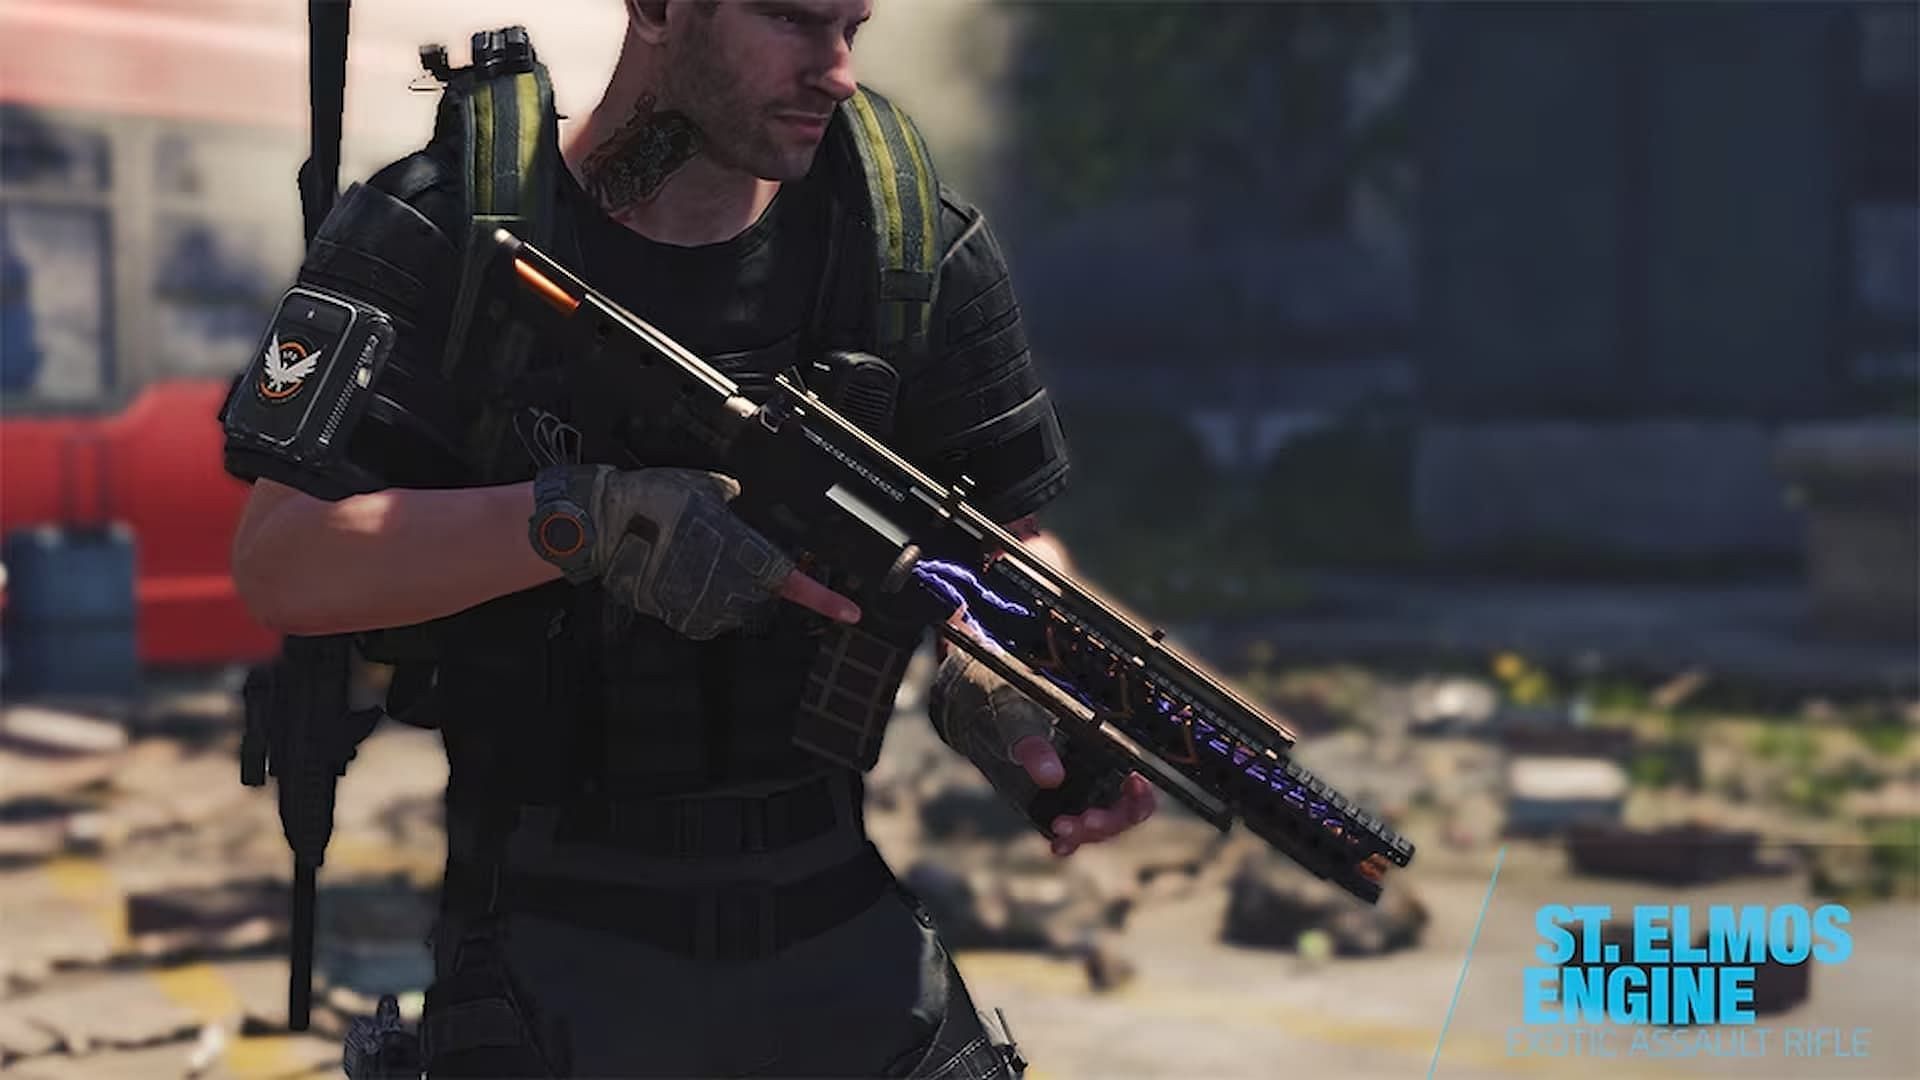 The St. Elmos Engine in The Division 2 (Image via Ubisoft)